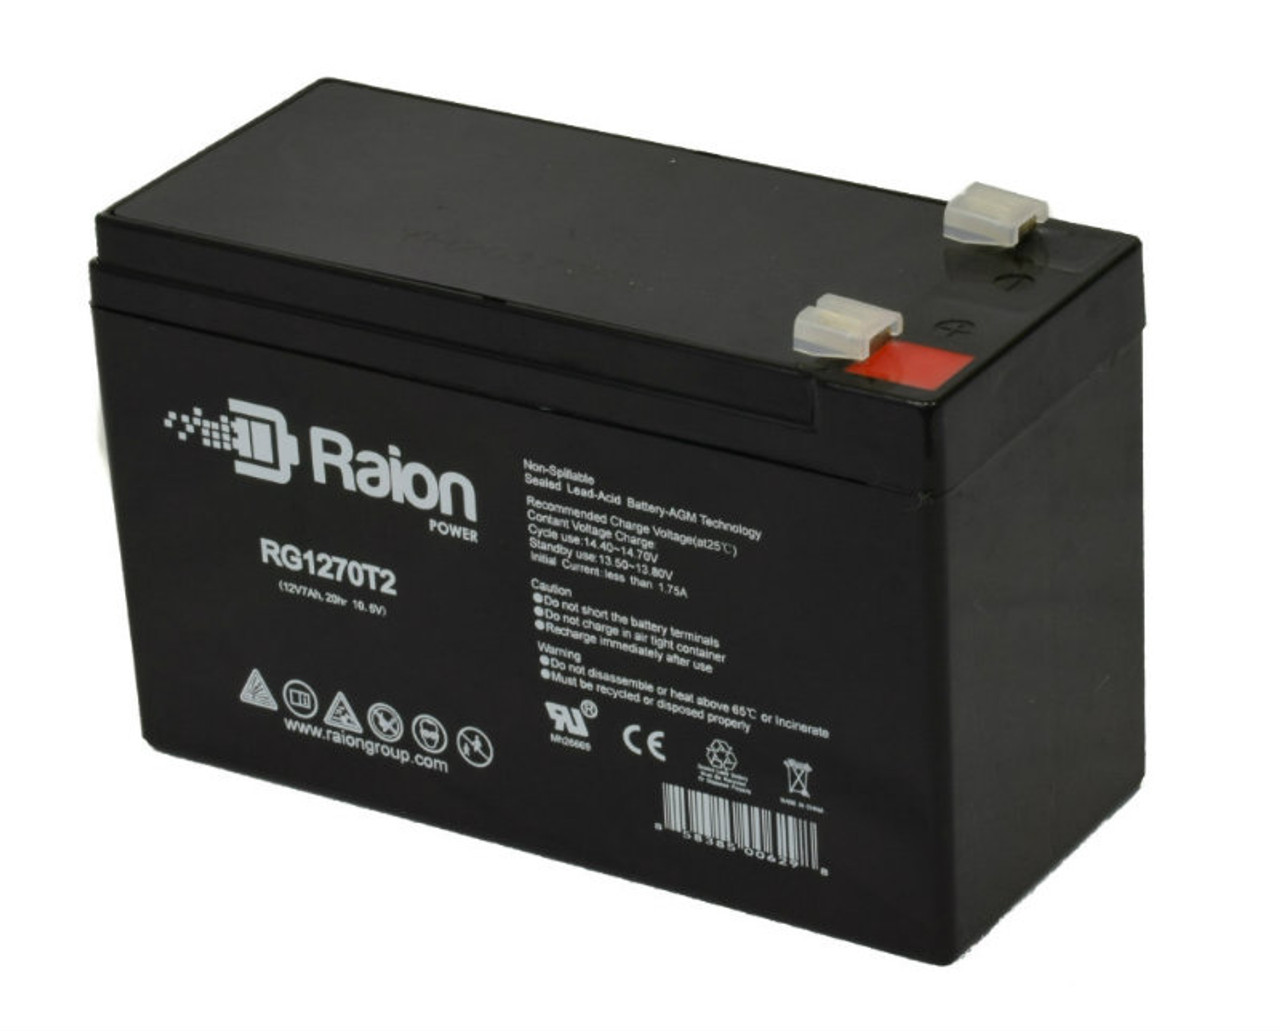 Raion Power Replacement 12V 7Ah Battery for Kontron Instruments 7350 Cardiac Output Monitor - 1 Pack